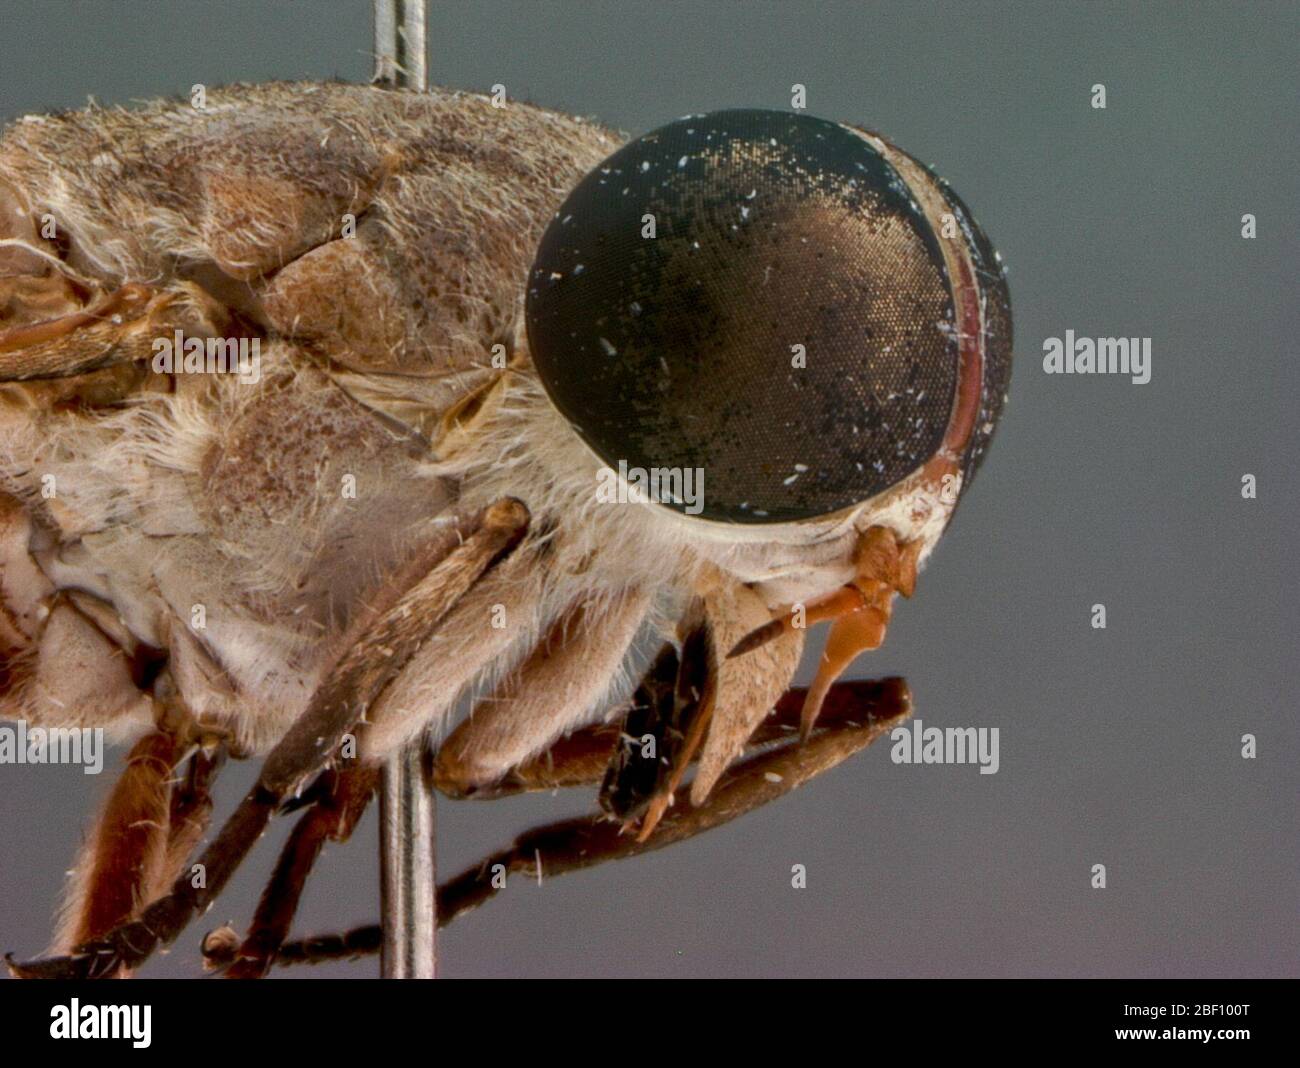 Tabanus wilpattuensis. Diagnosis: Tabanus wilpattuensis n.sp. is closest to T. indiscriminatus Ricardo but can be distinguished from it by larger size, slightly broader frons and callosity, less extensively denuded vertex, longer more slender palpi, paler brownish tibiae apically. Stock Photo